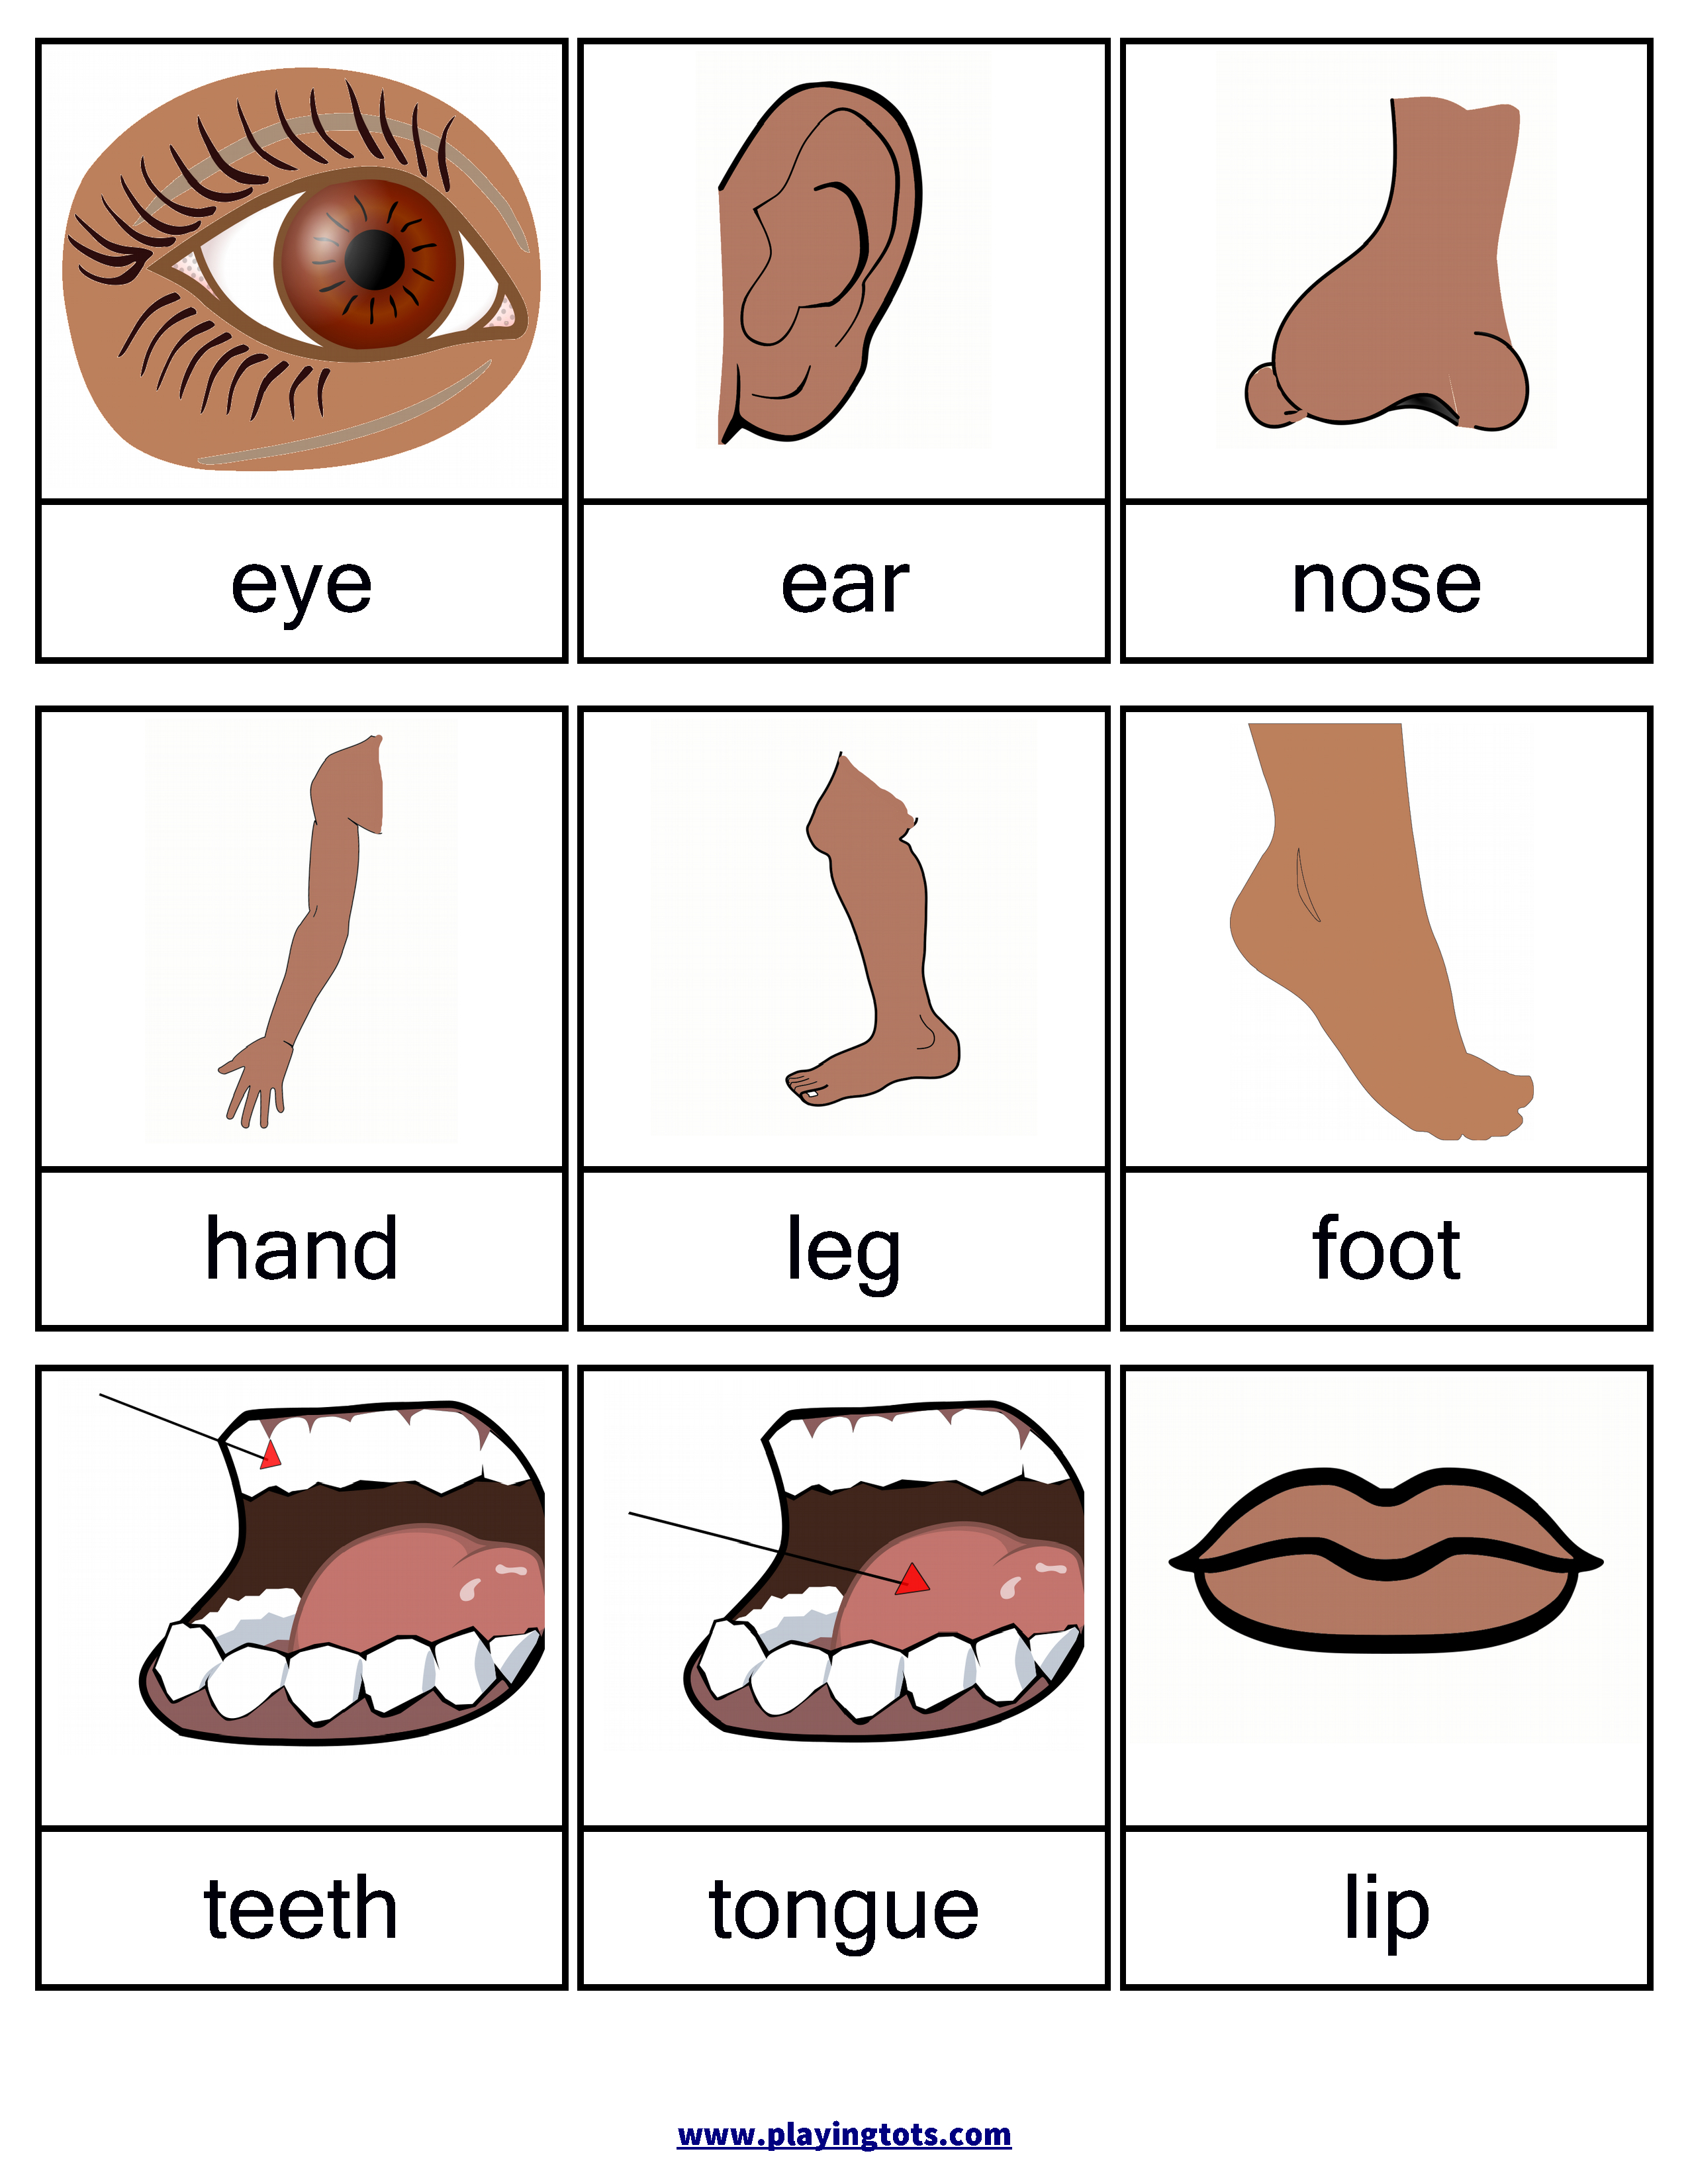 Free Printable Body Parts Flashcards | Free Printable For Learning | Free Printable Worksheets Kindergarten Body Parts